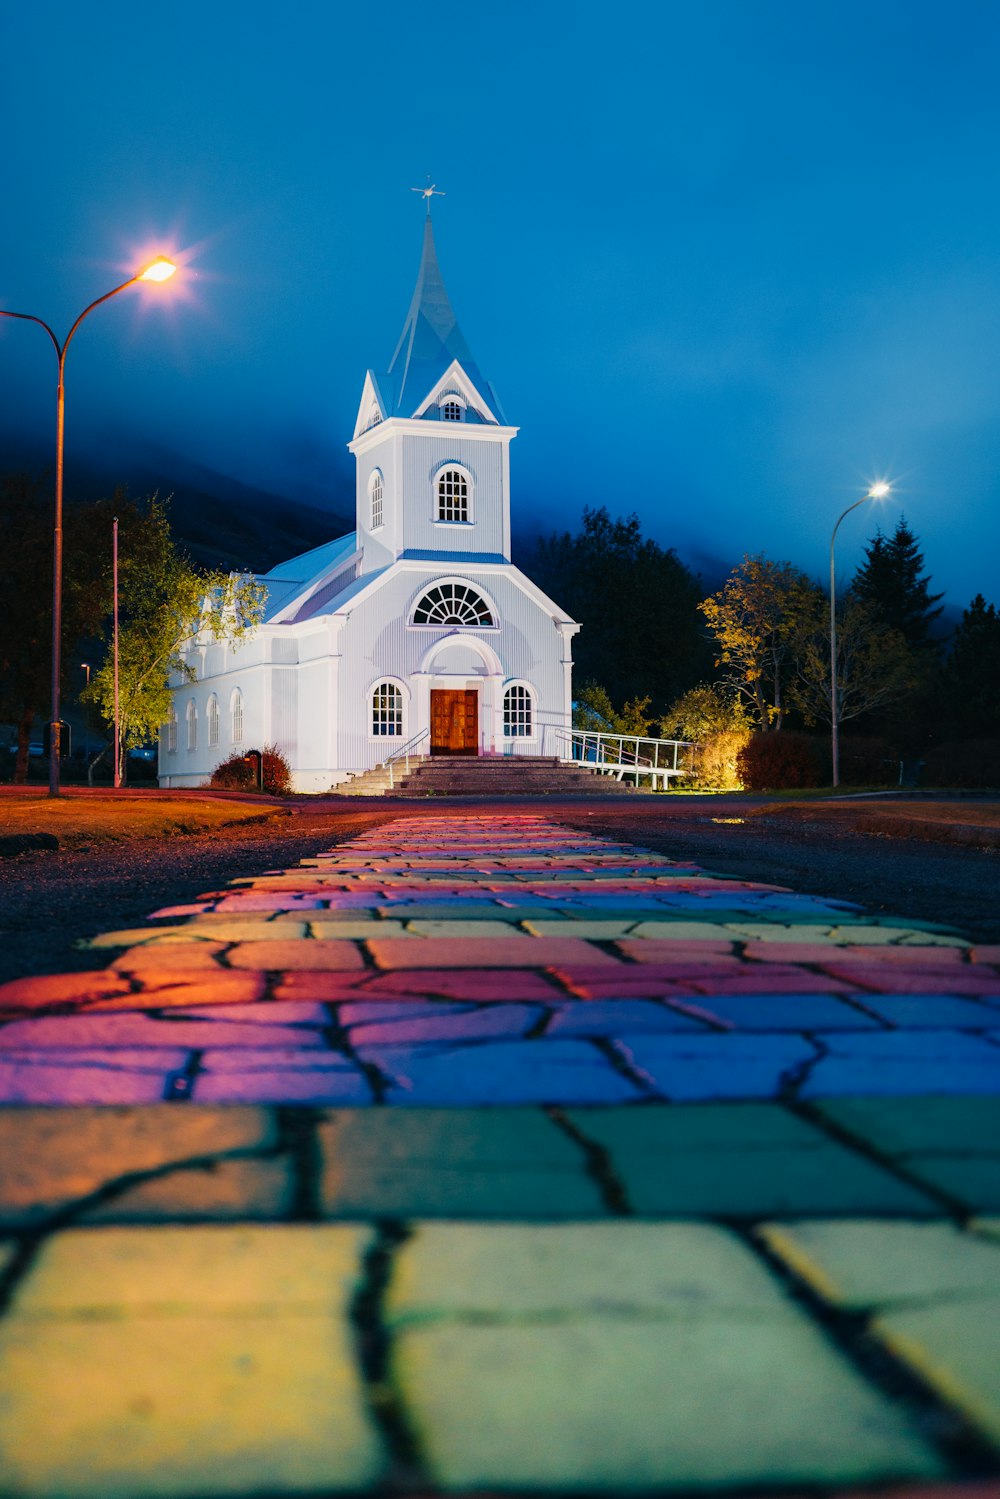 a church lit up at night with a colorful walkway